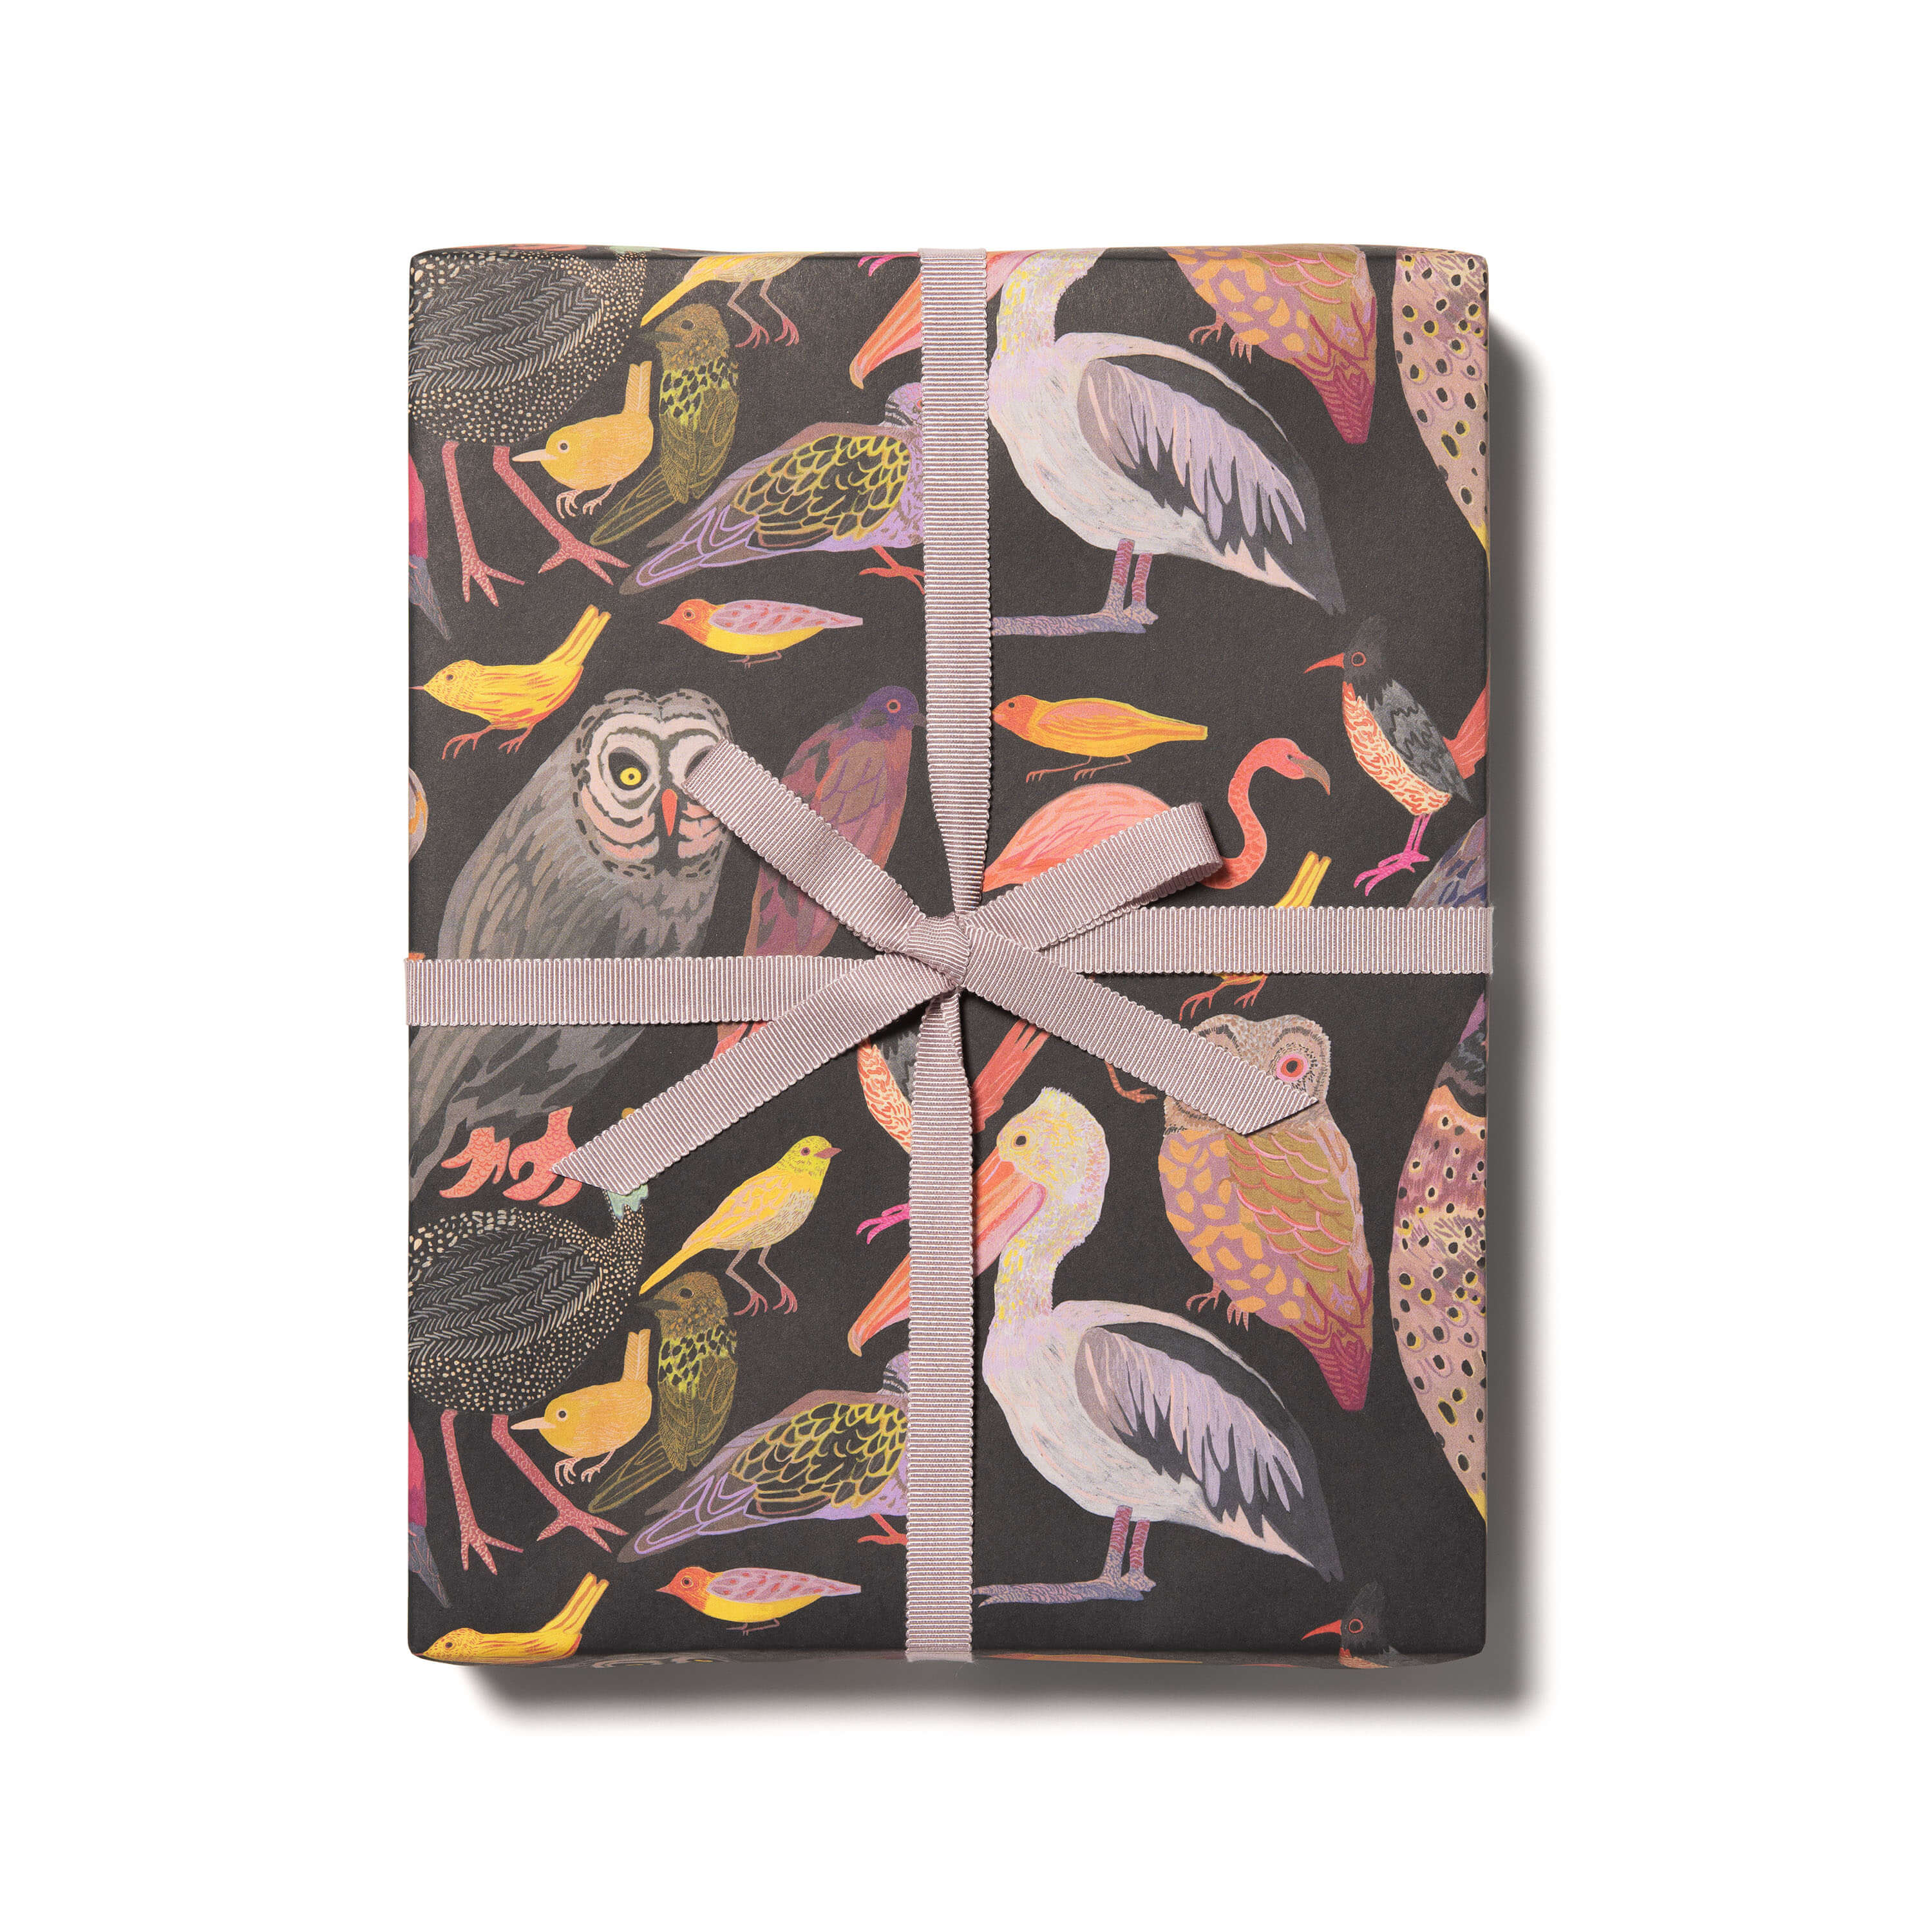 Aviary wrapping paper Roll of 3 Sheets